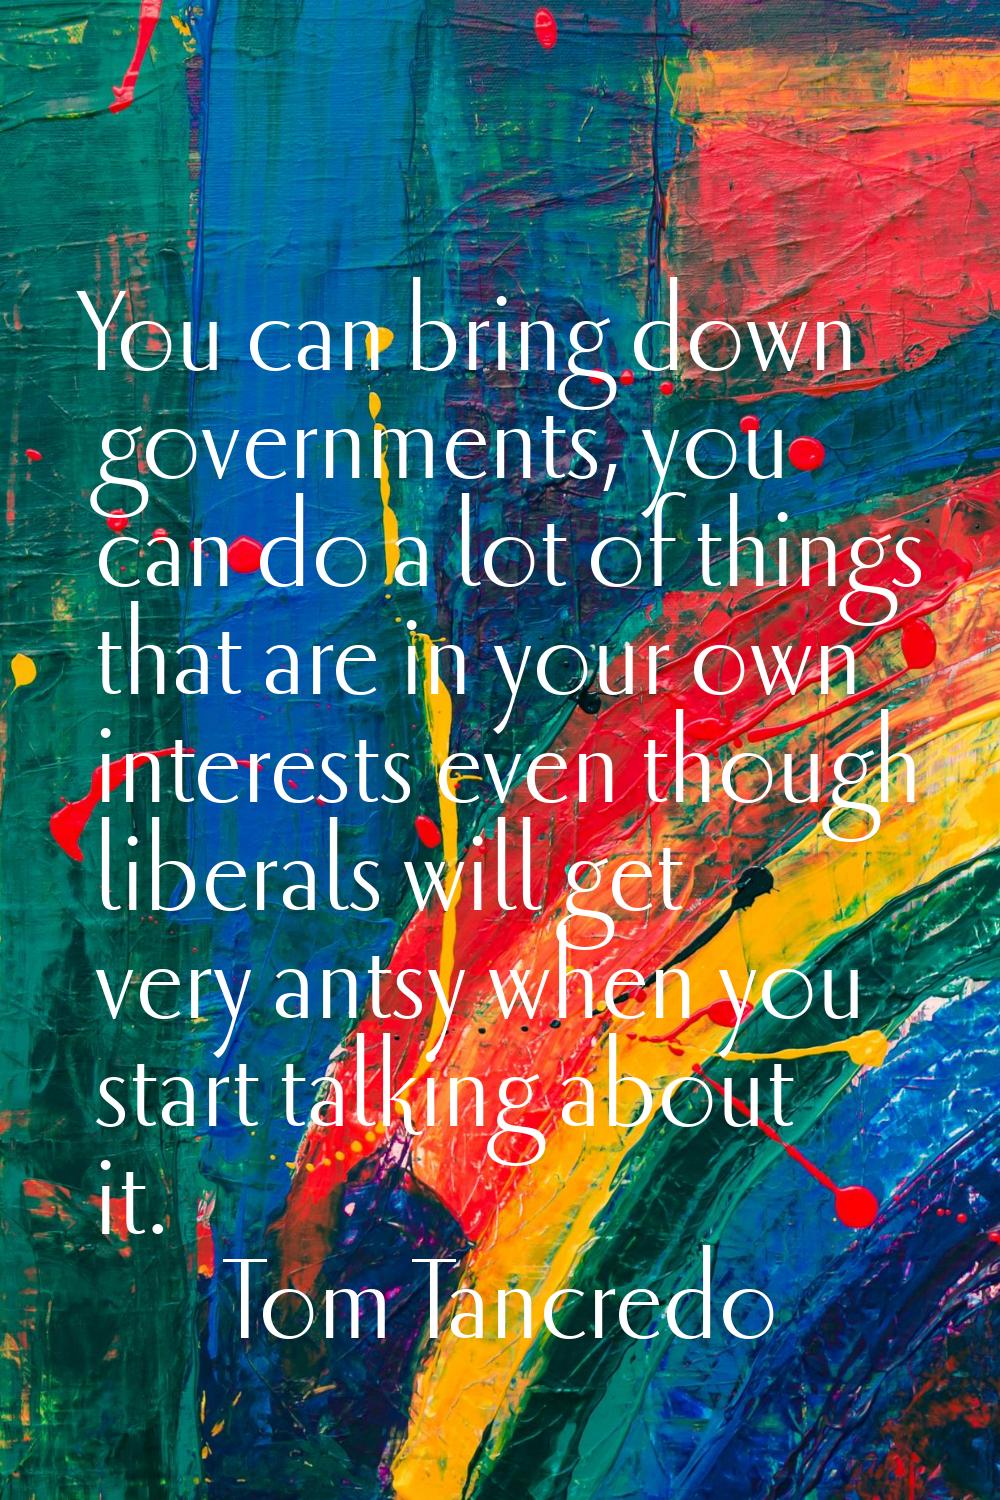 You can bring down governments, you can do a lot of things that are in your own interests even thou